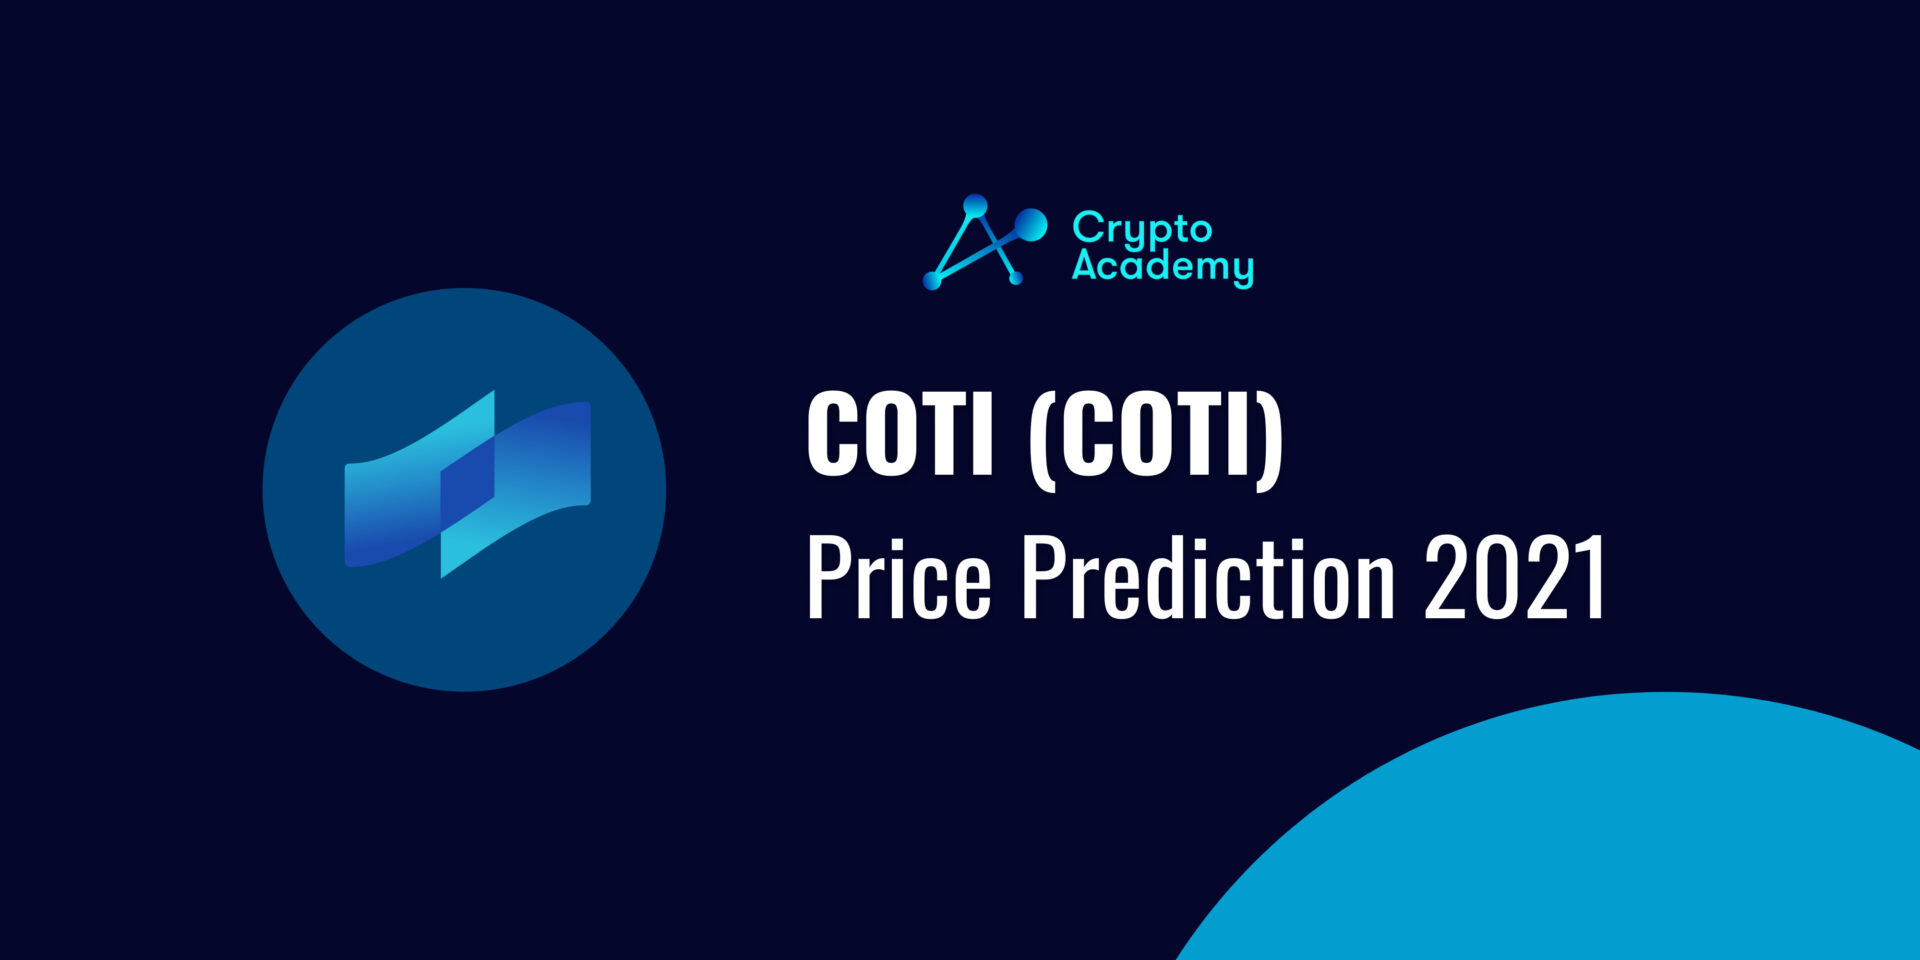 COTI Price Prediction 2021 - What Will COTI Price be by the End of 2021?